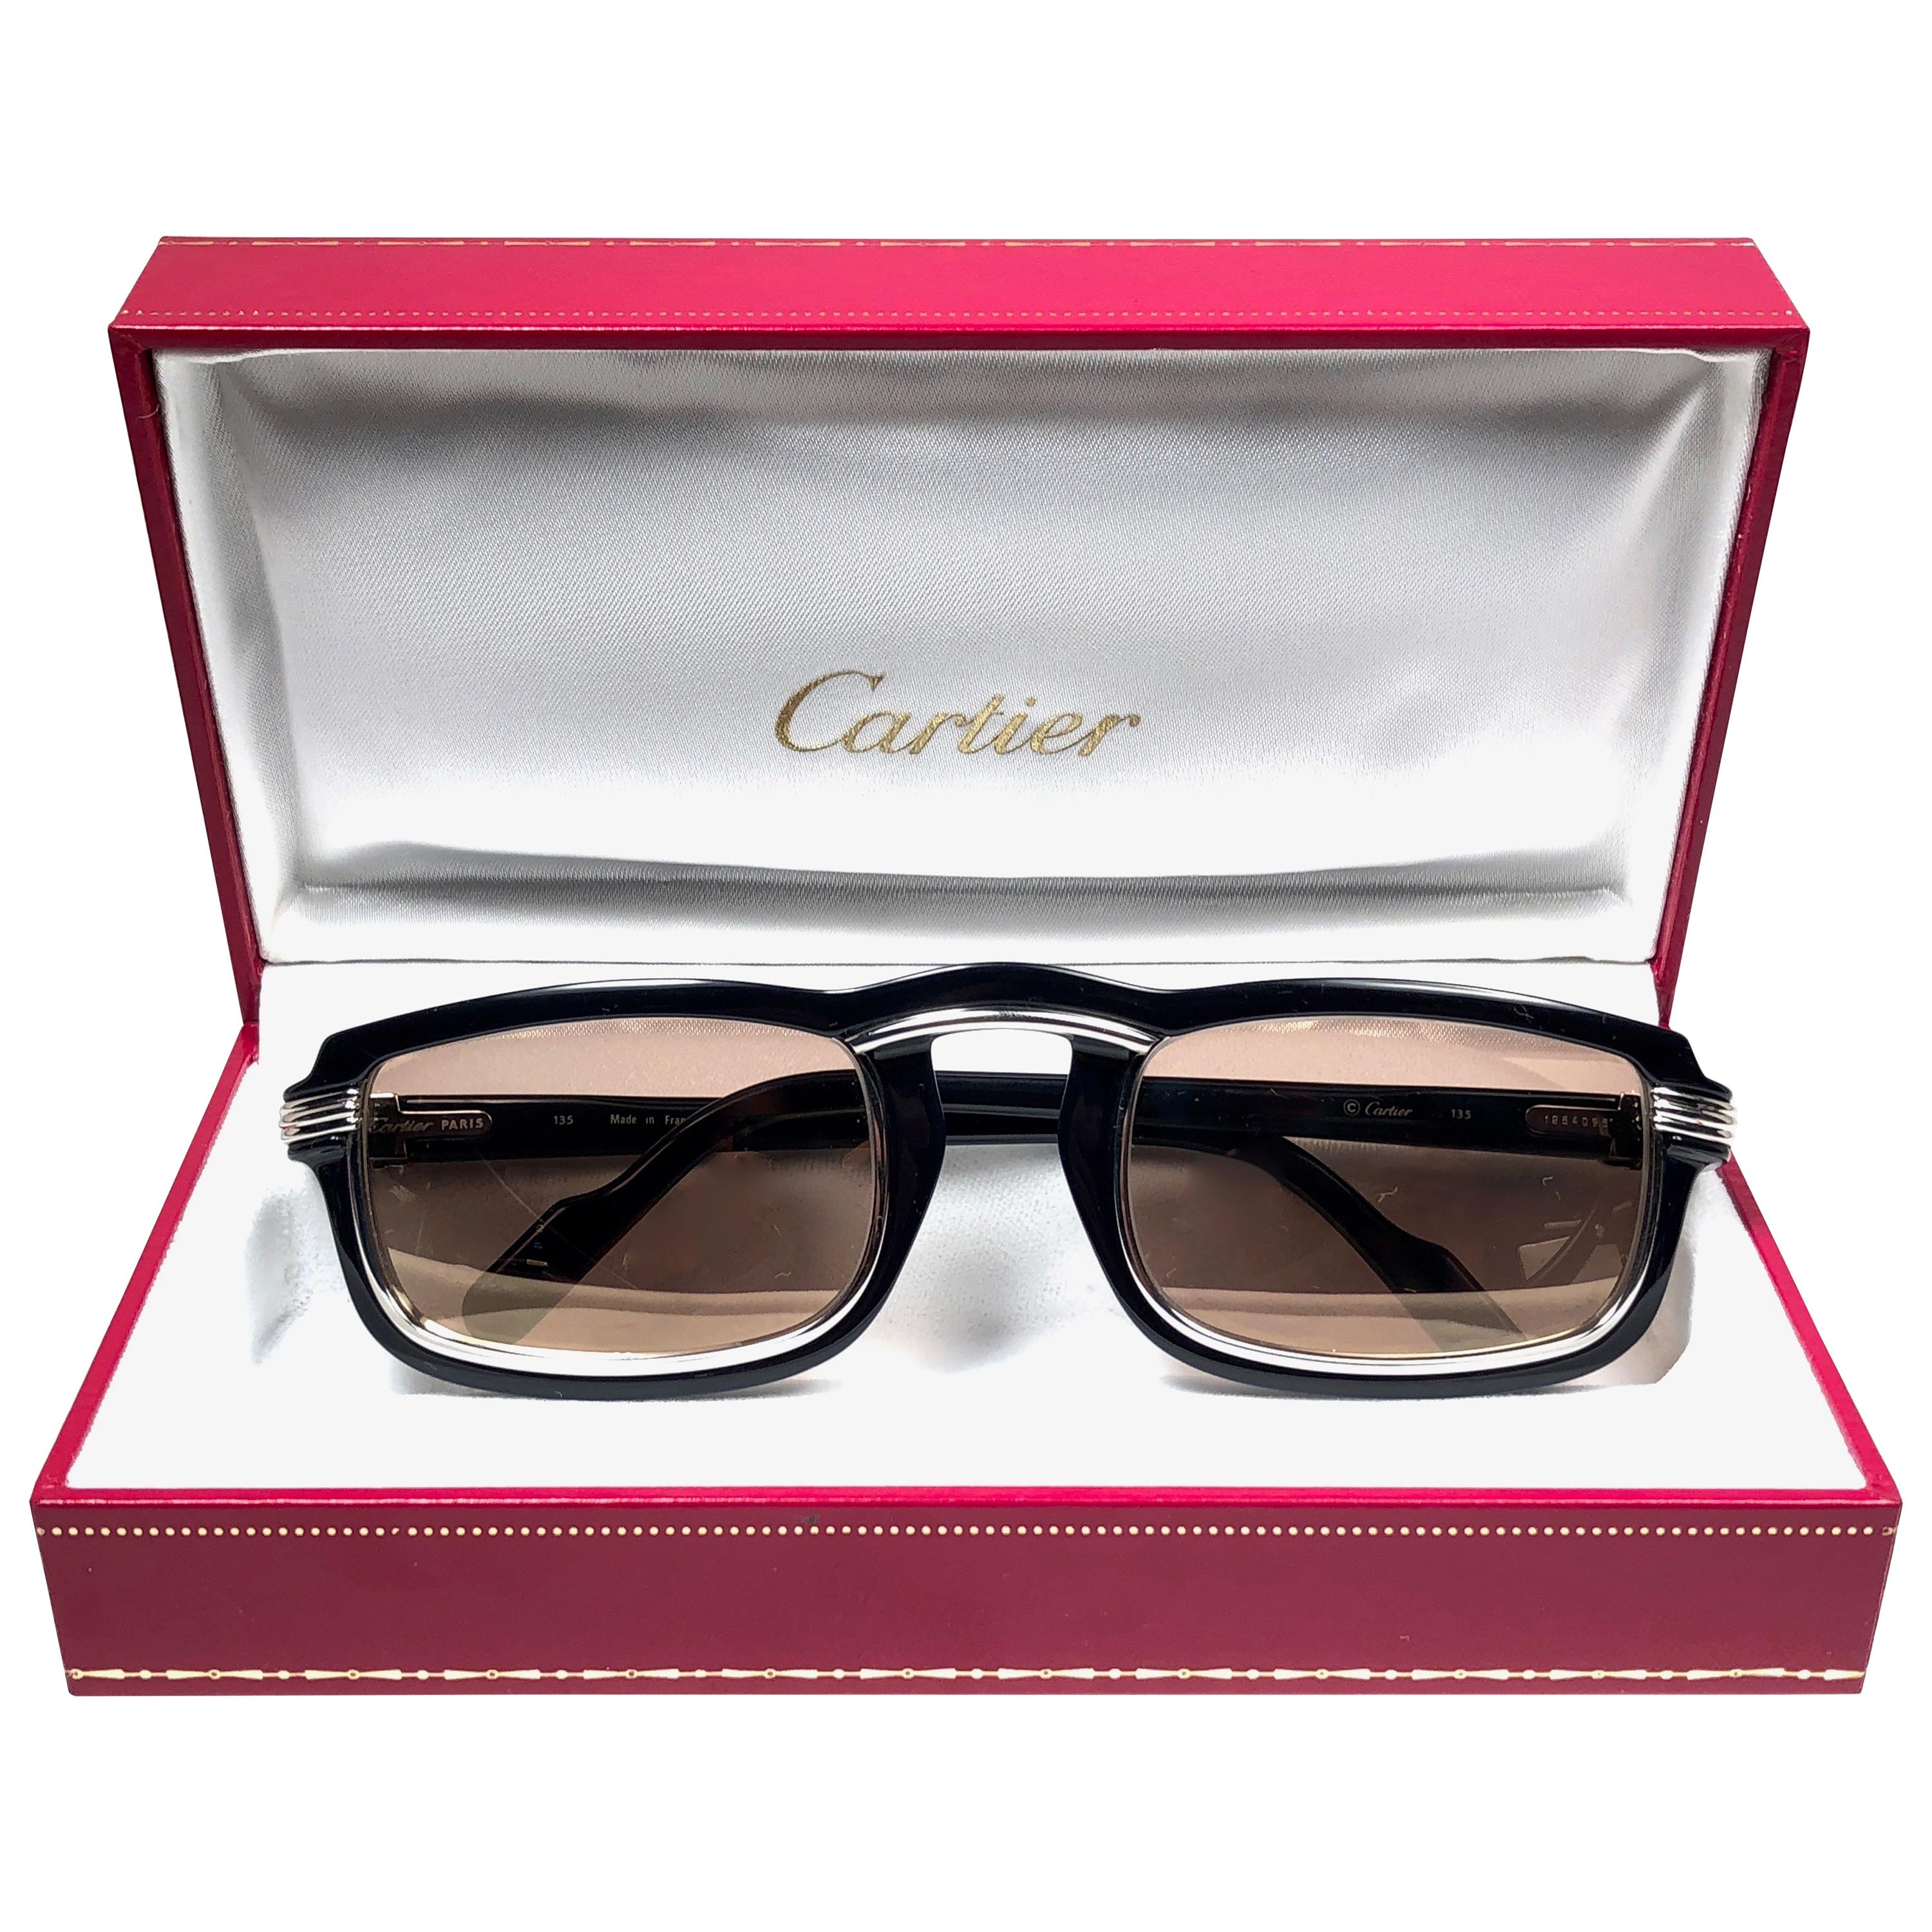 Cartier Sunglasses for Sale | Catawiki